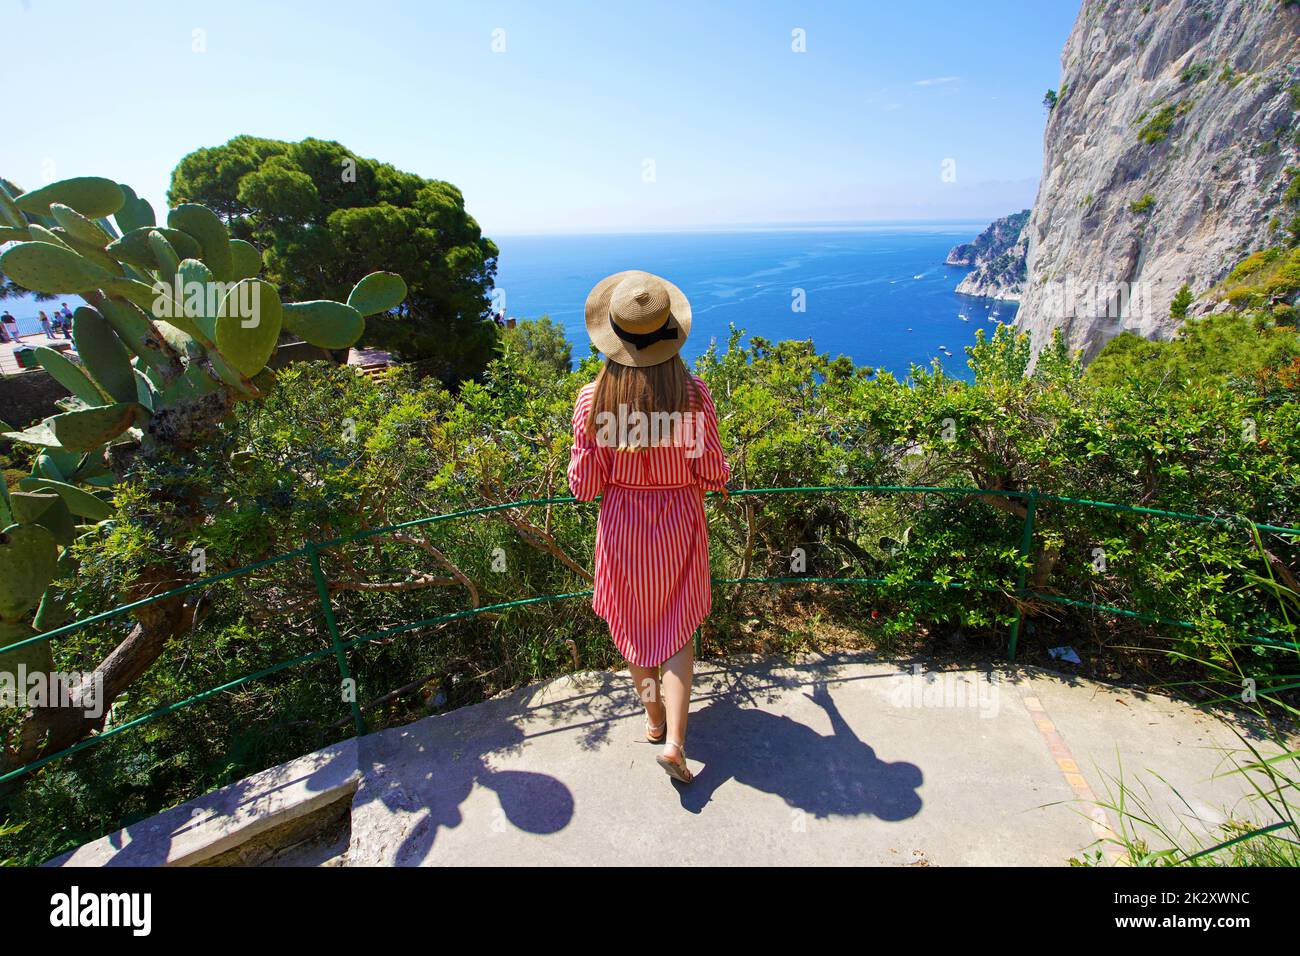 Aerial view of young tourist woman enjoying landscape from balcony in the Gardens of Augustus on Capri Island, Italy Stock Photo